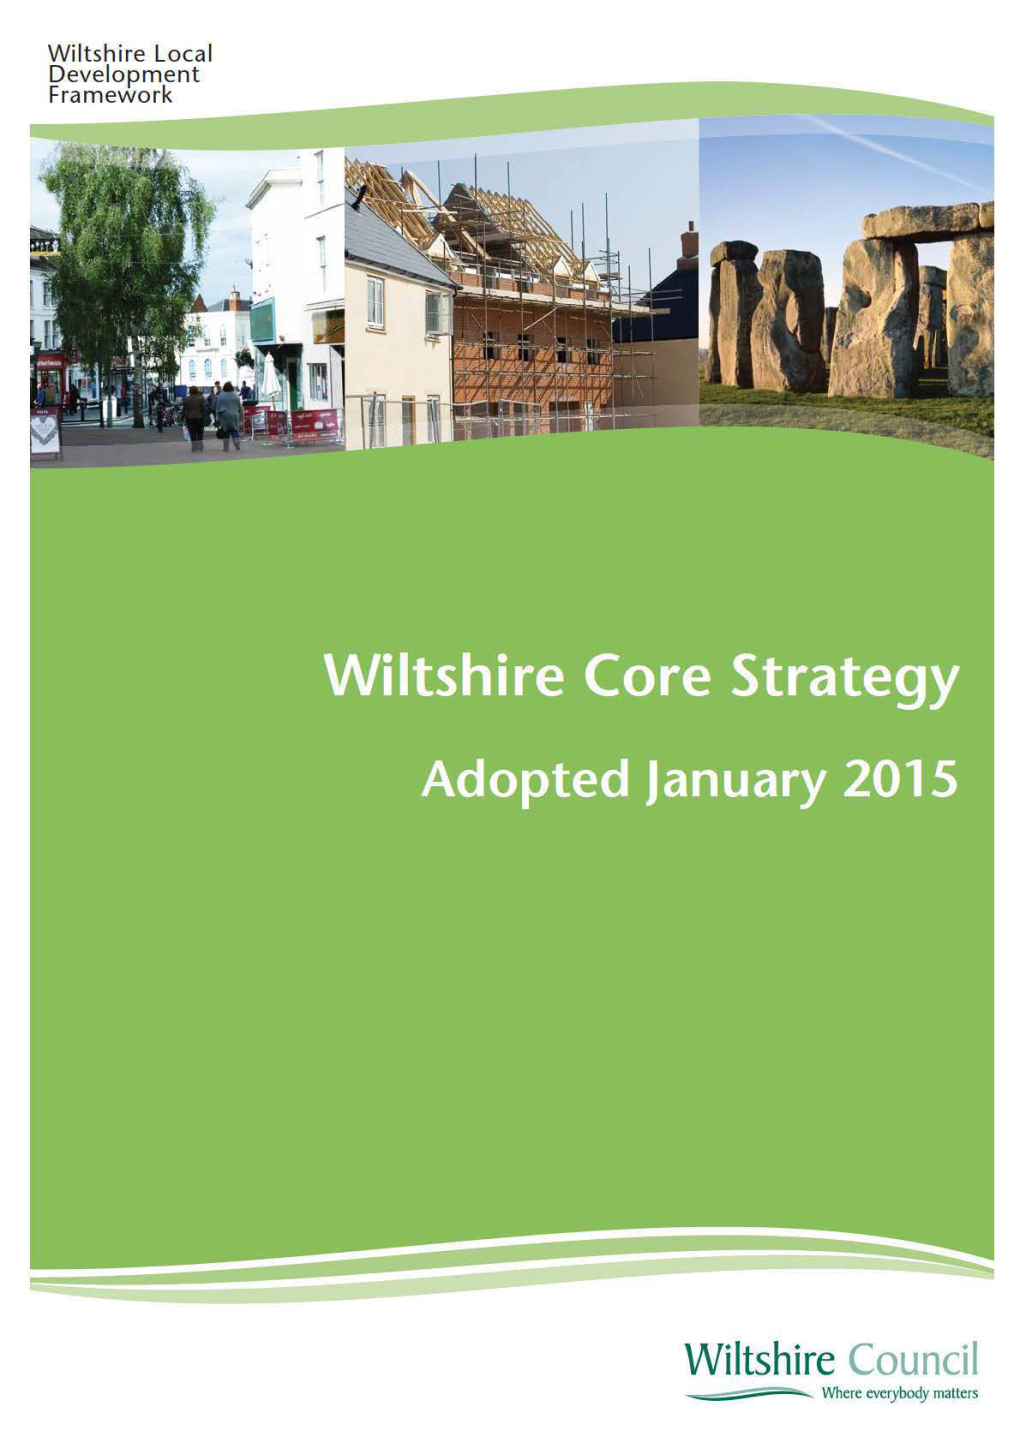 Wiltshire Core Strategy Provides Up-To-Date Strategic Planning Policy for Wiltshire and Covers the Period up to 2026